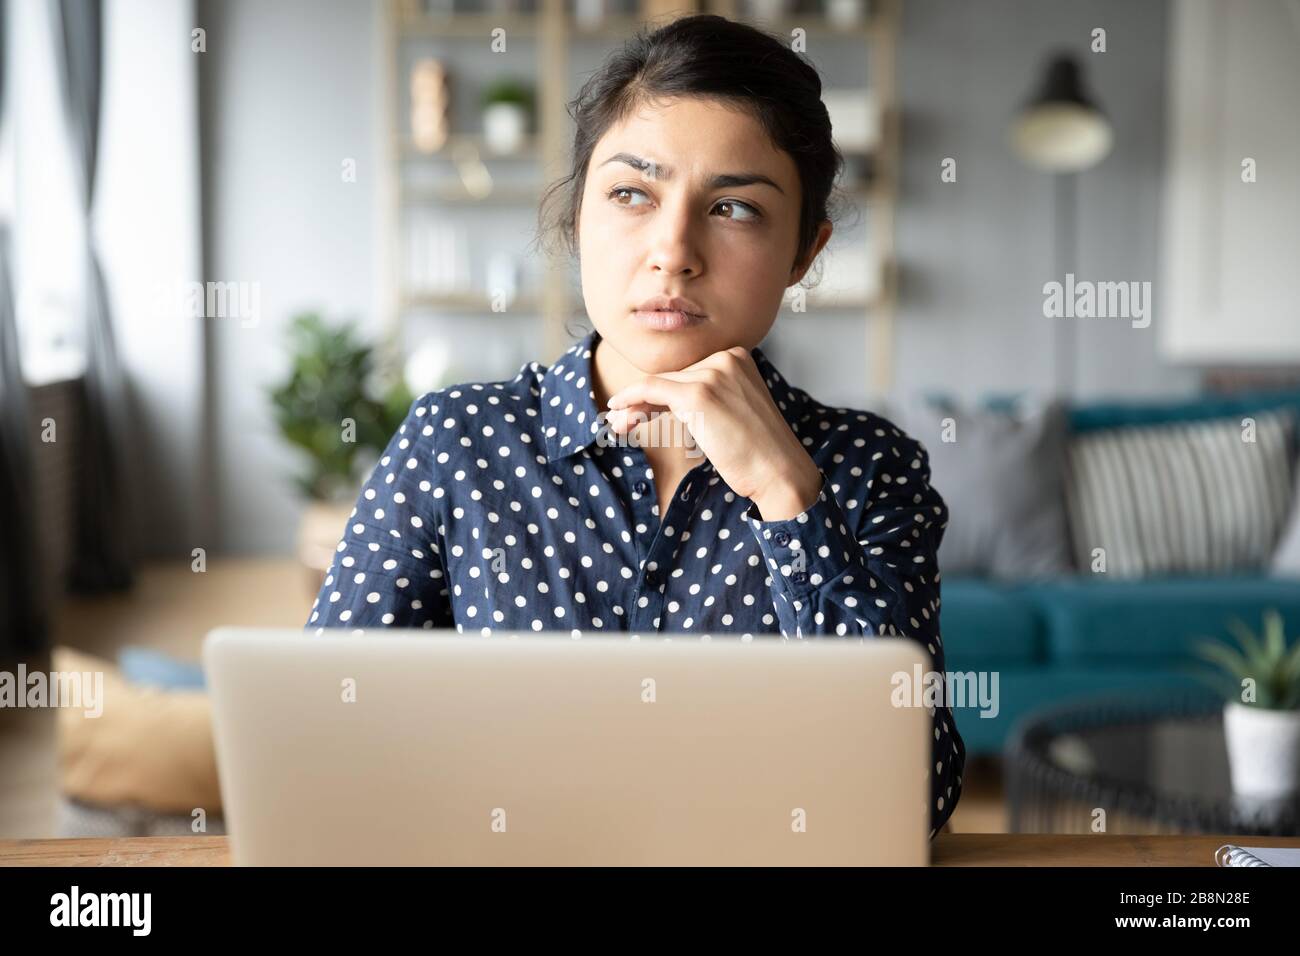 Thoughtful young Indian woman pondering task, working on project Stock Photo